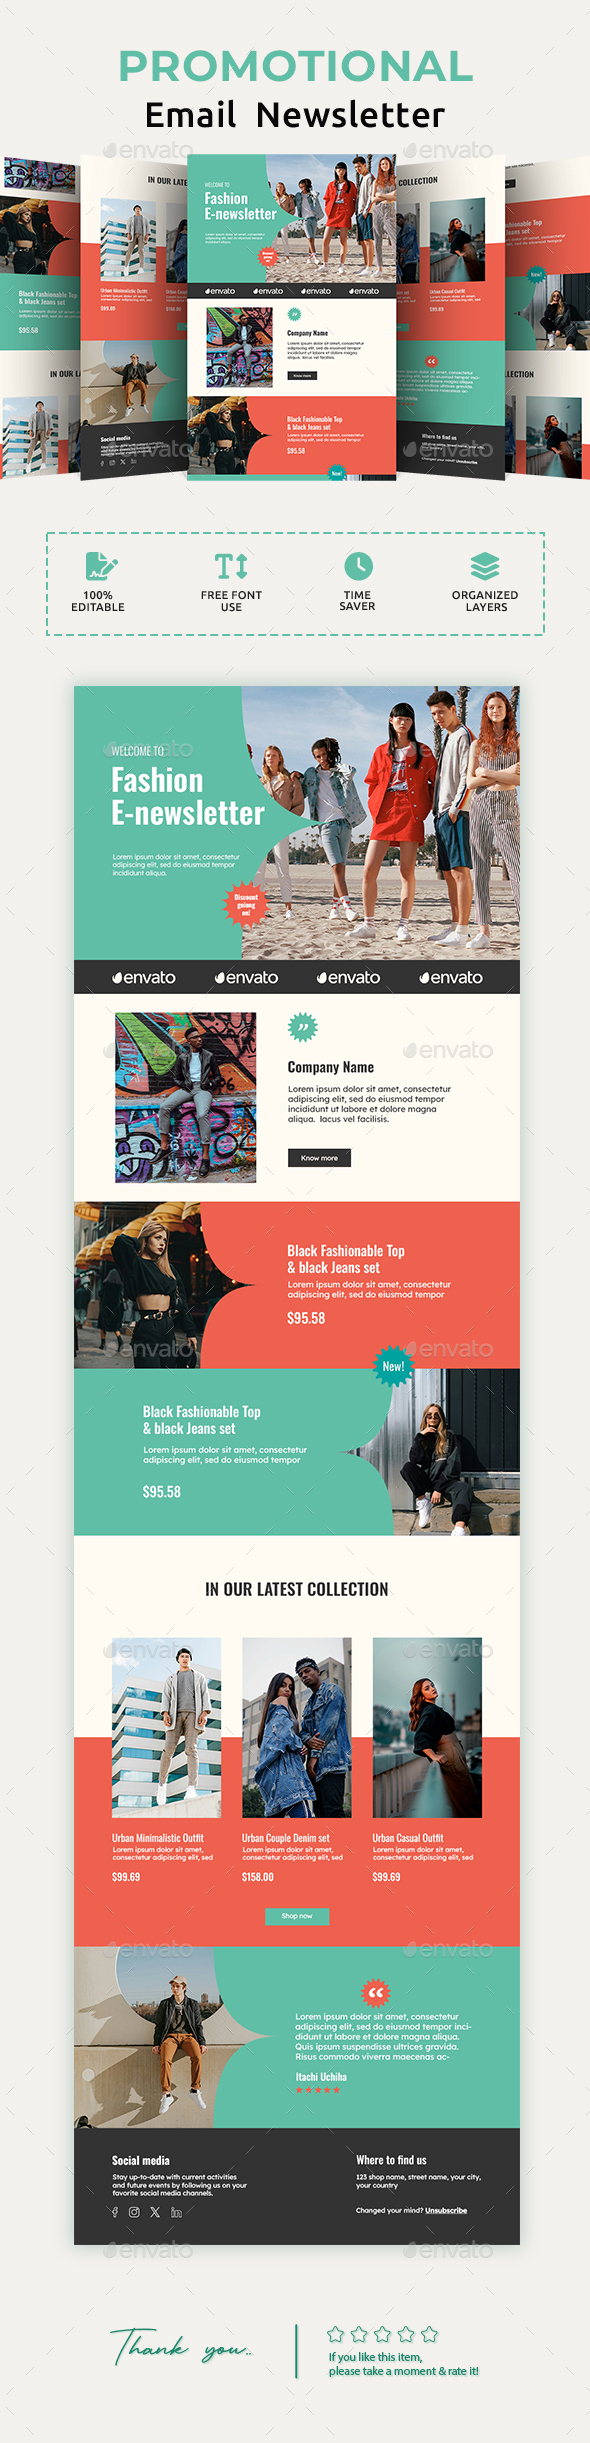 [DOWNLOAD]Lifestyle Fashion Email Newsletter PSD Template